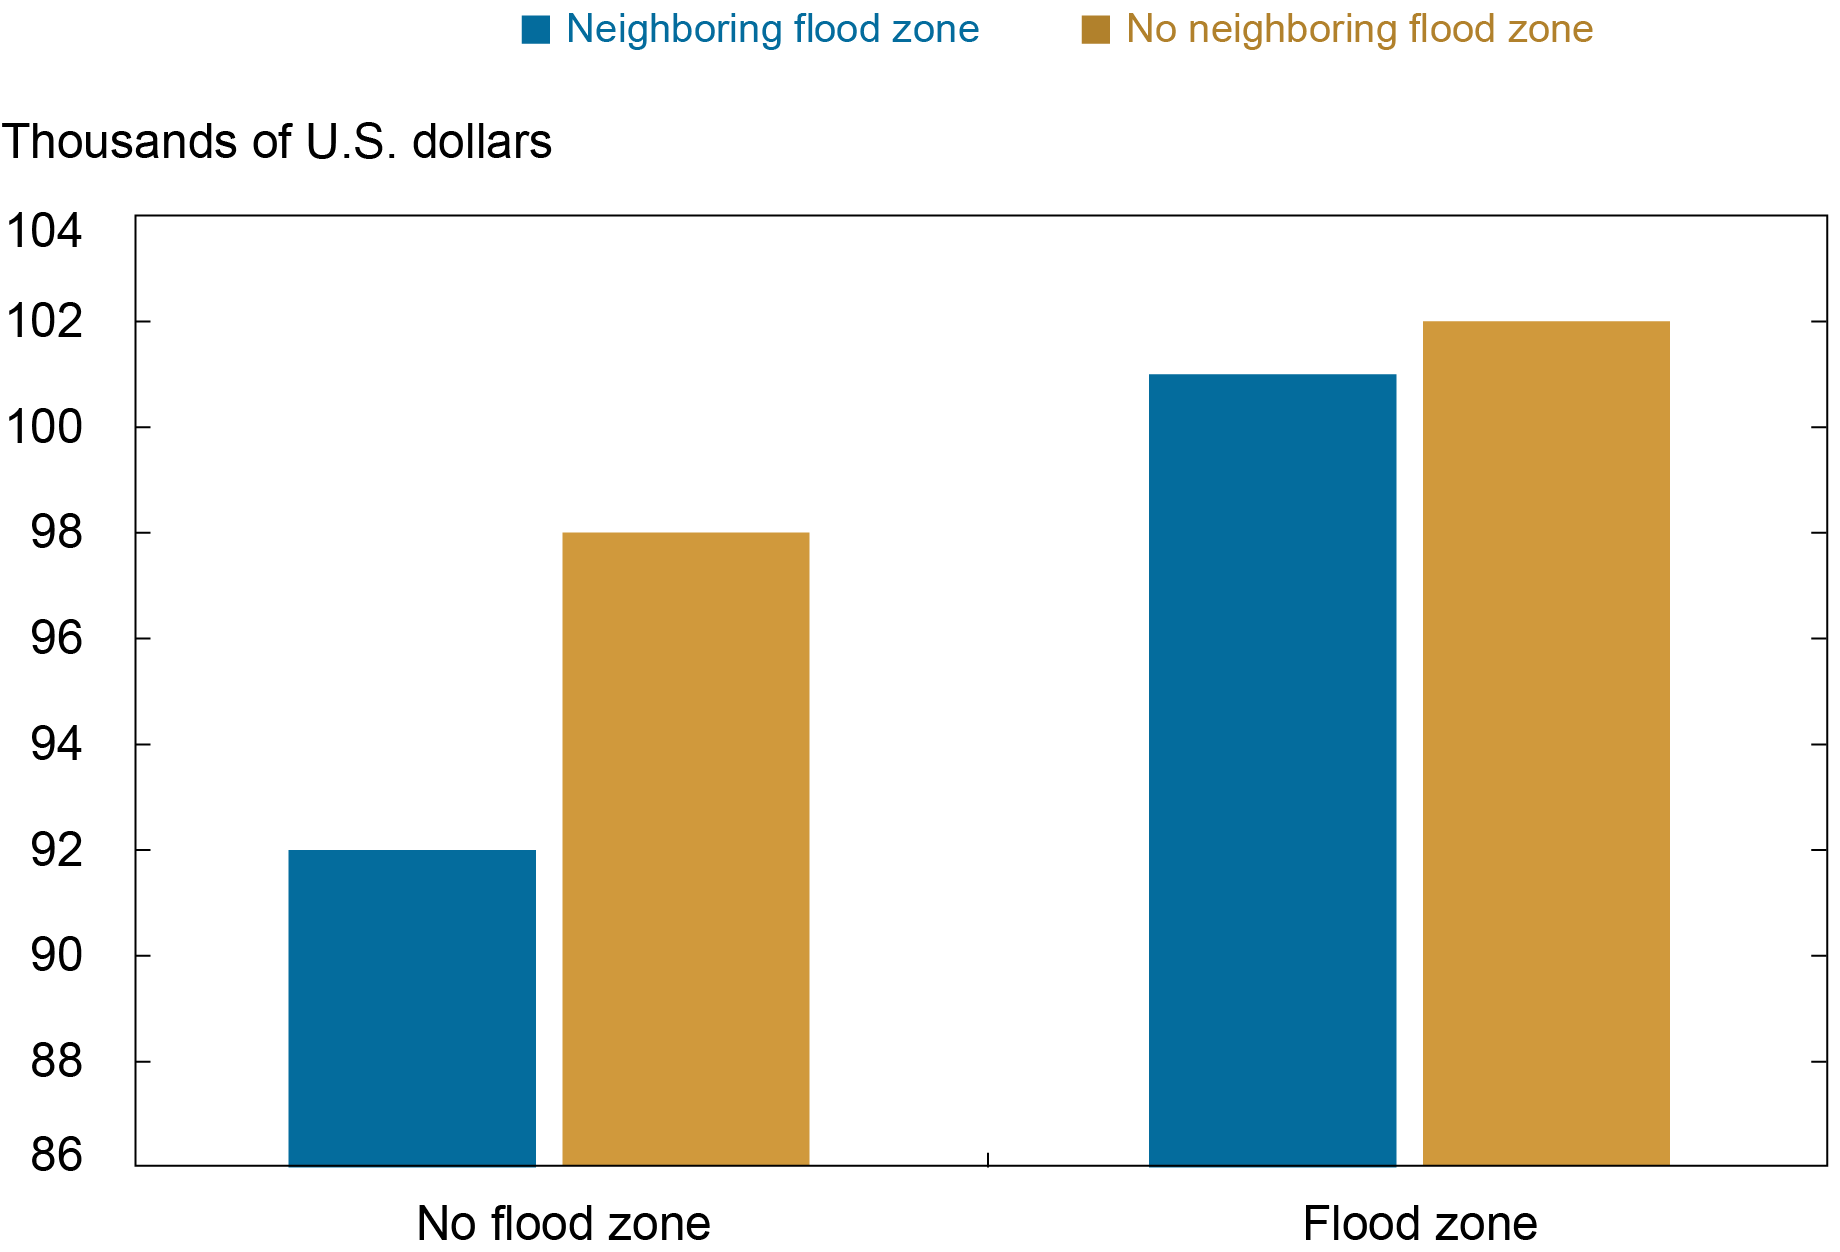 Liberty Street Economics bar chart showing mortgage borrowers in regions with no flood maps have on average 8 percent lower incomes than their counterparts in neighboring regions with flood maps.